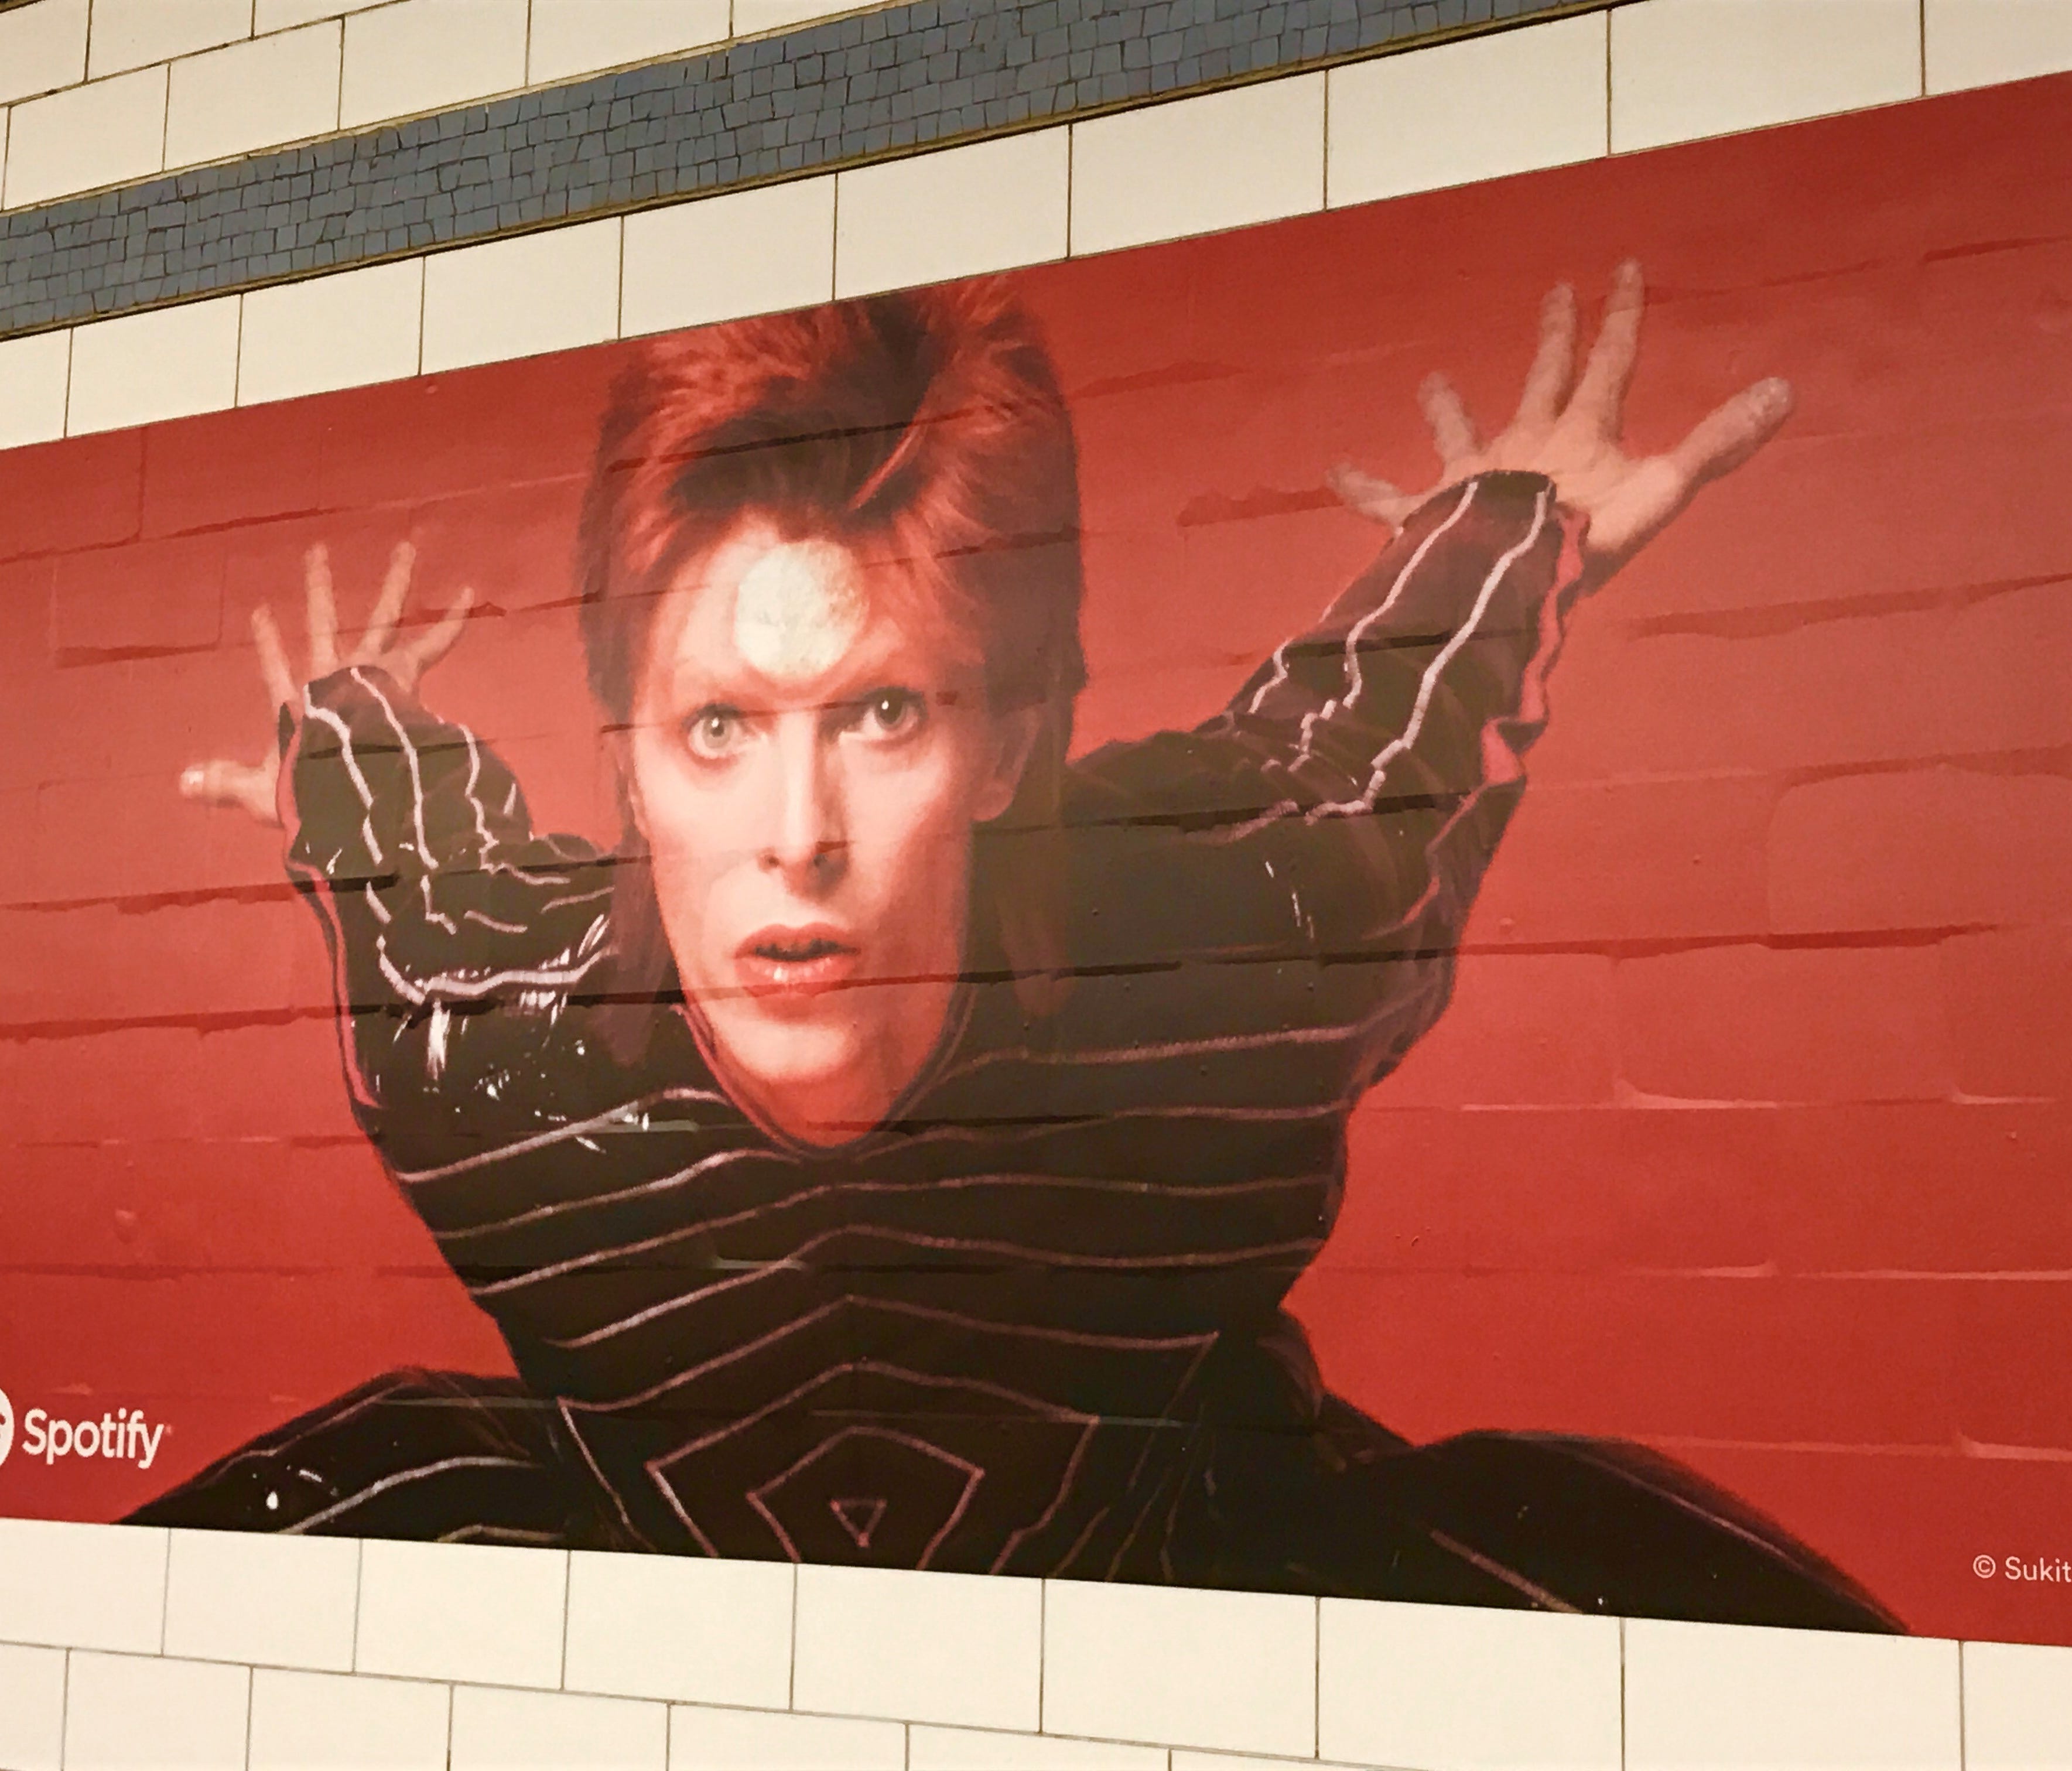 These David Bowie photos are displayed on the platform of the Bleecker Street station.